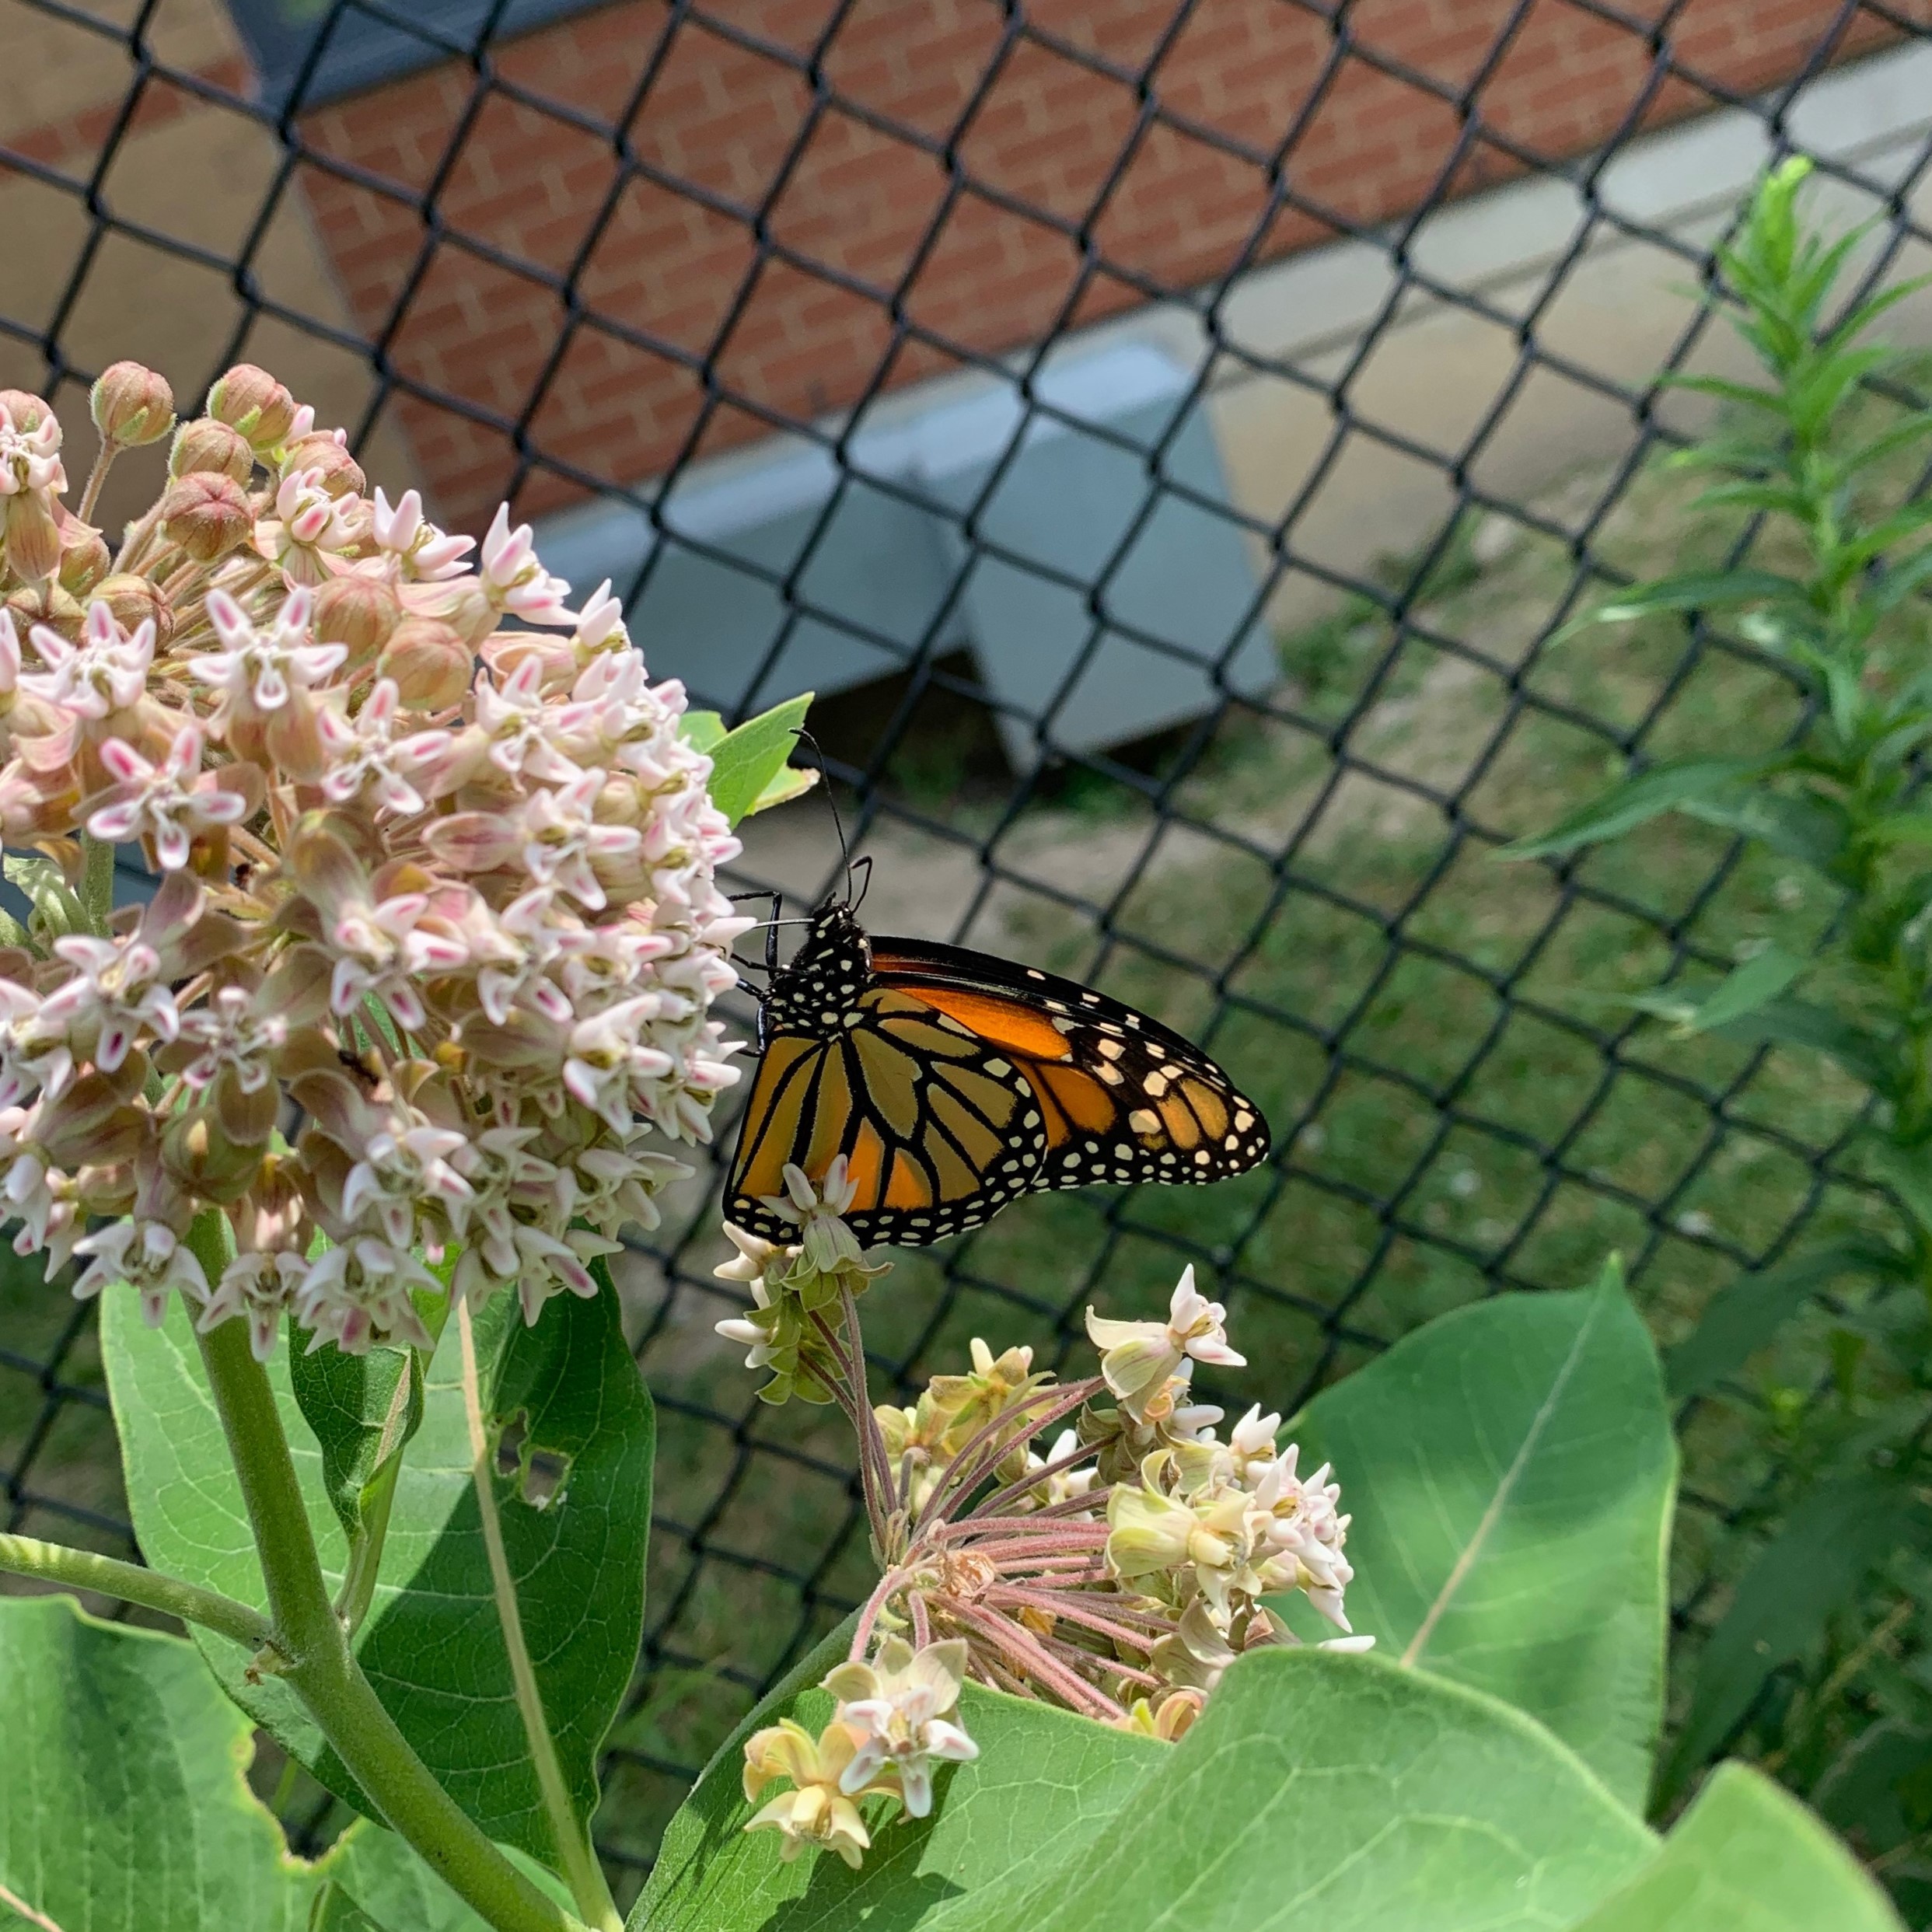 Milkweed with Monarch butterfly in Toronto. PC: Vanessa Nhan